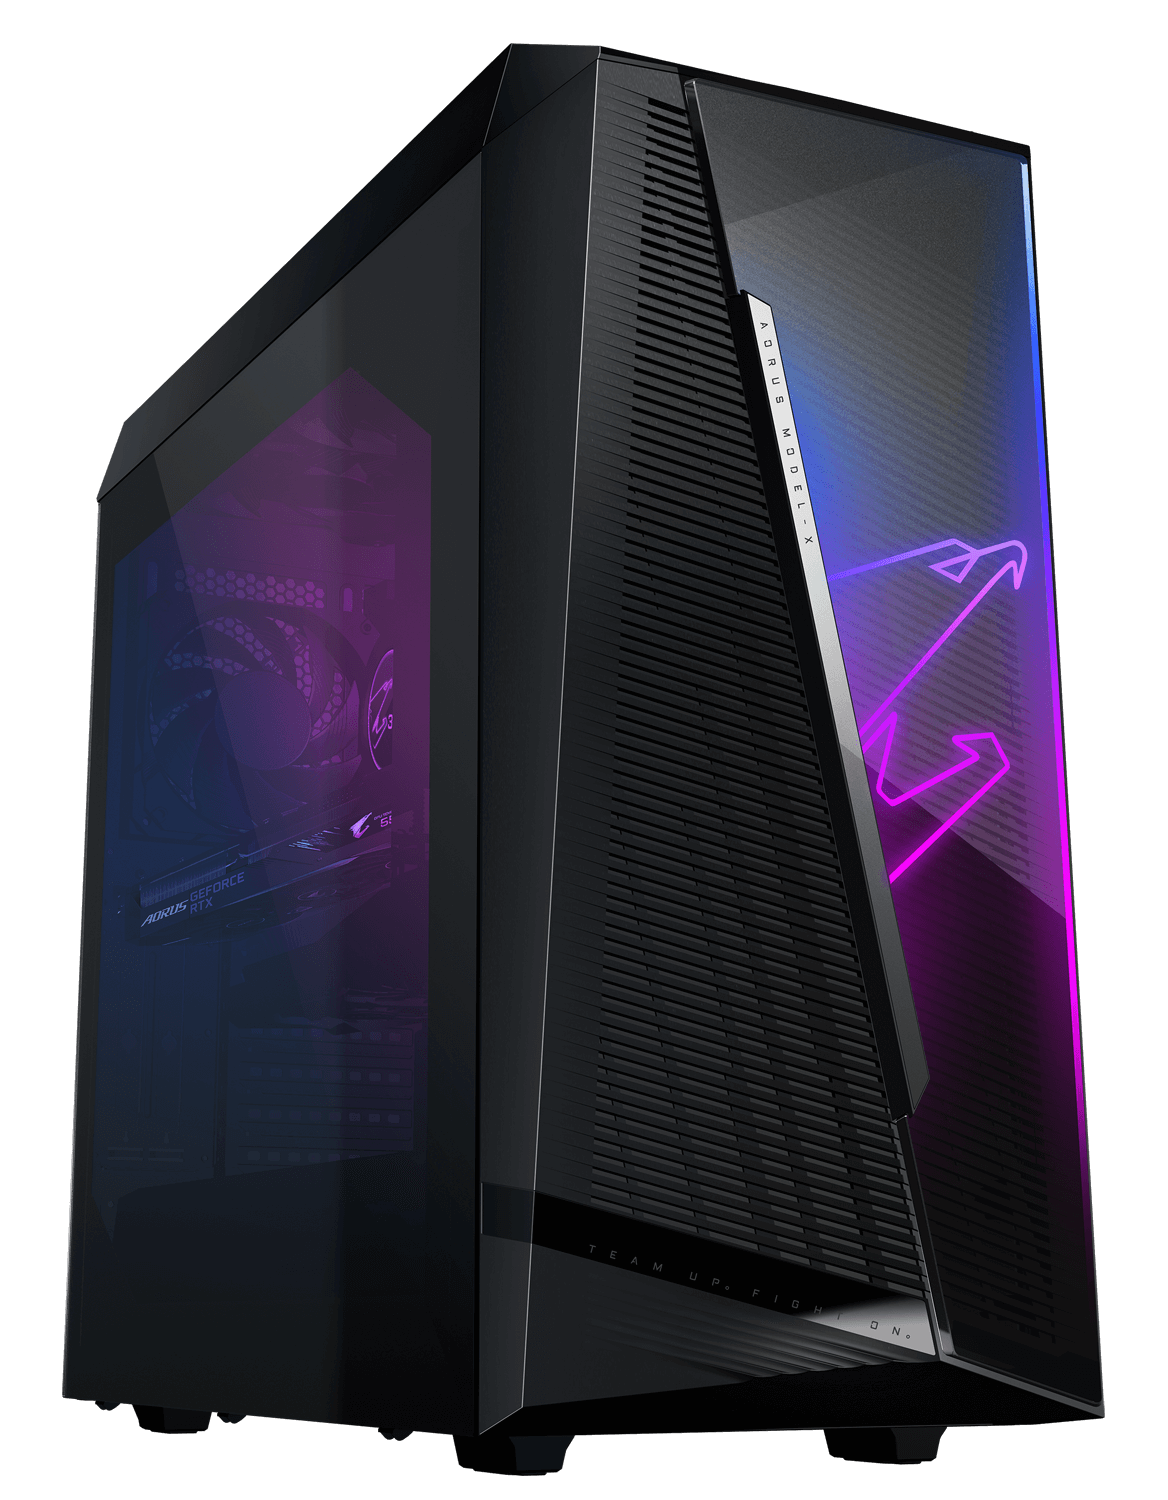 Striving for Perfection - GIGABYTE Launches Extreme AORUS Gaming Desktops Powered by AMD